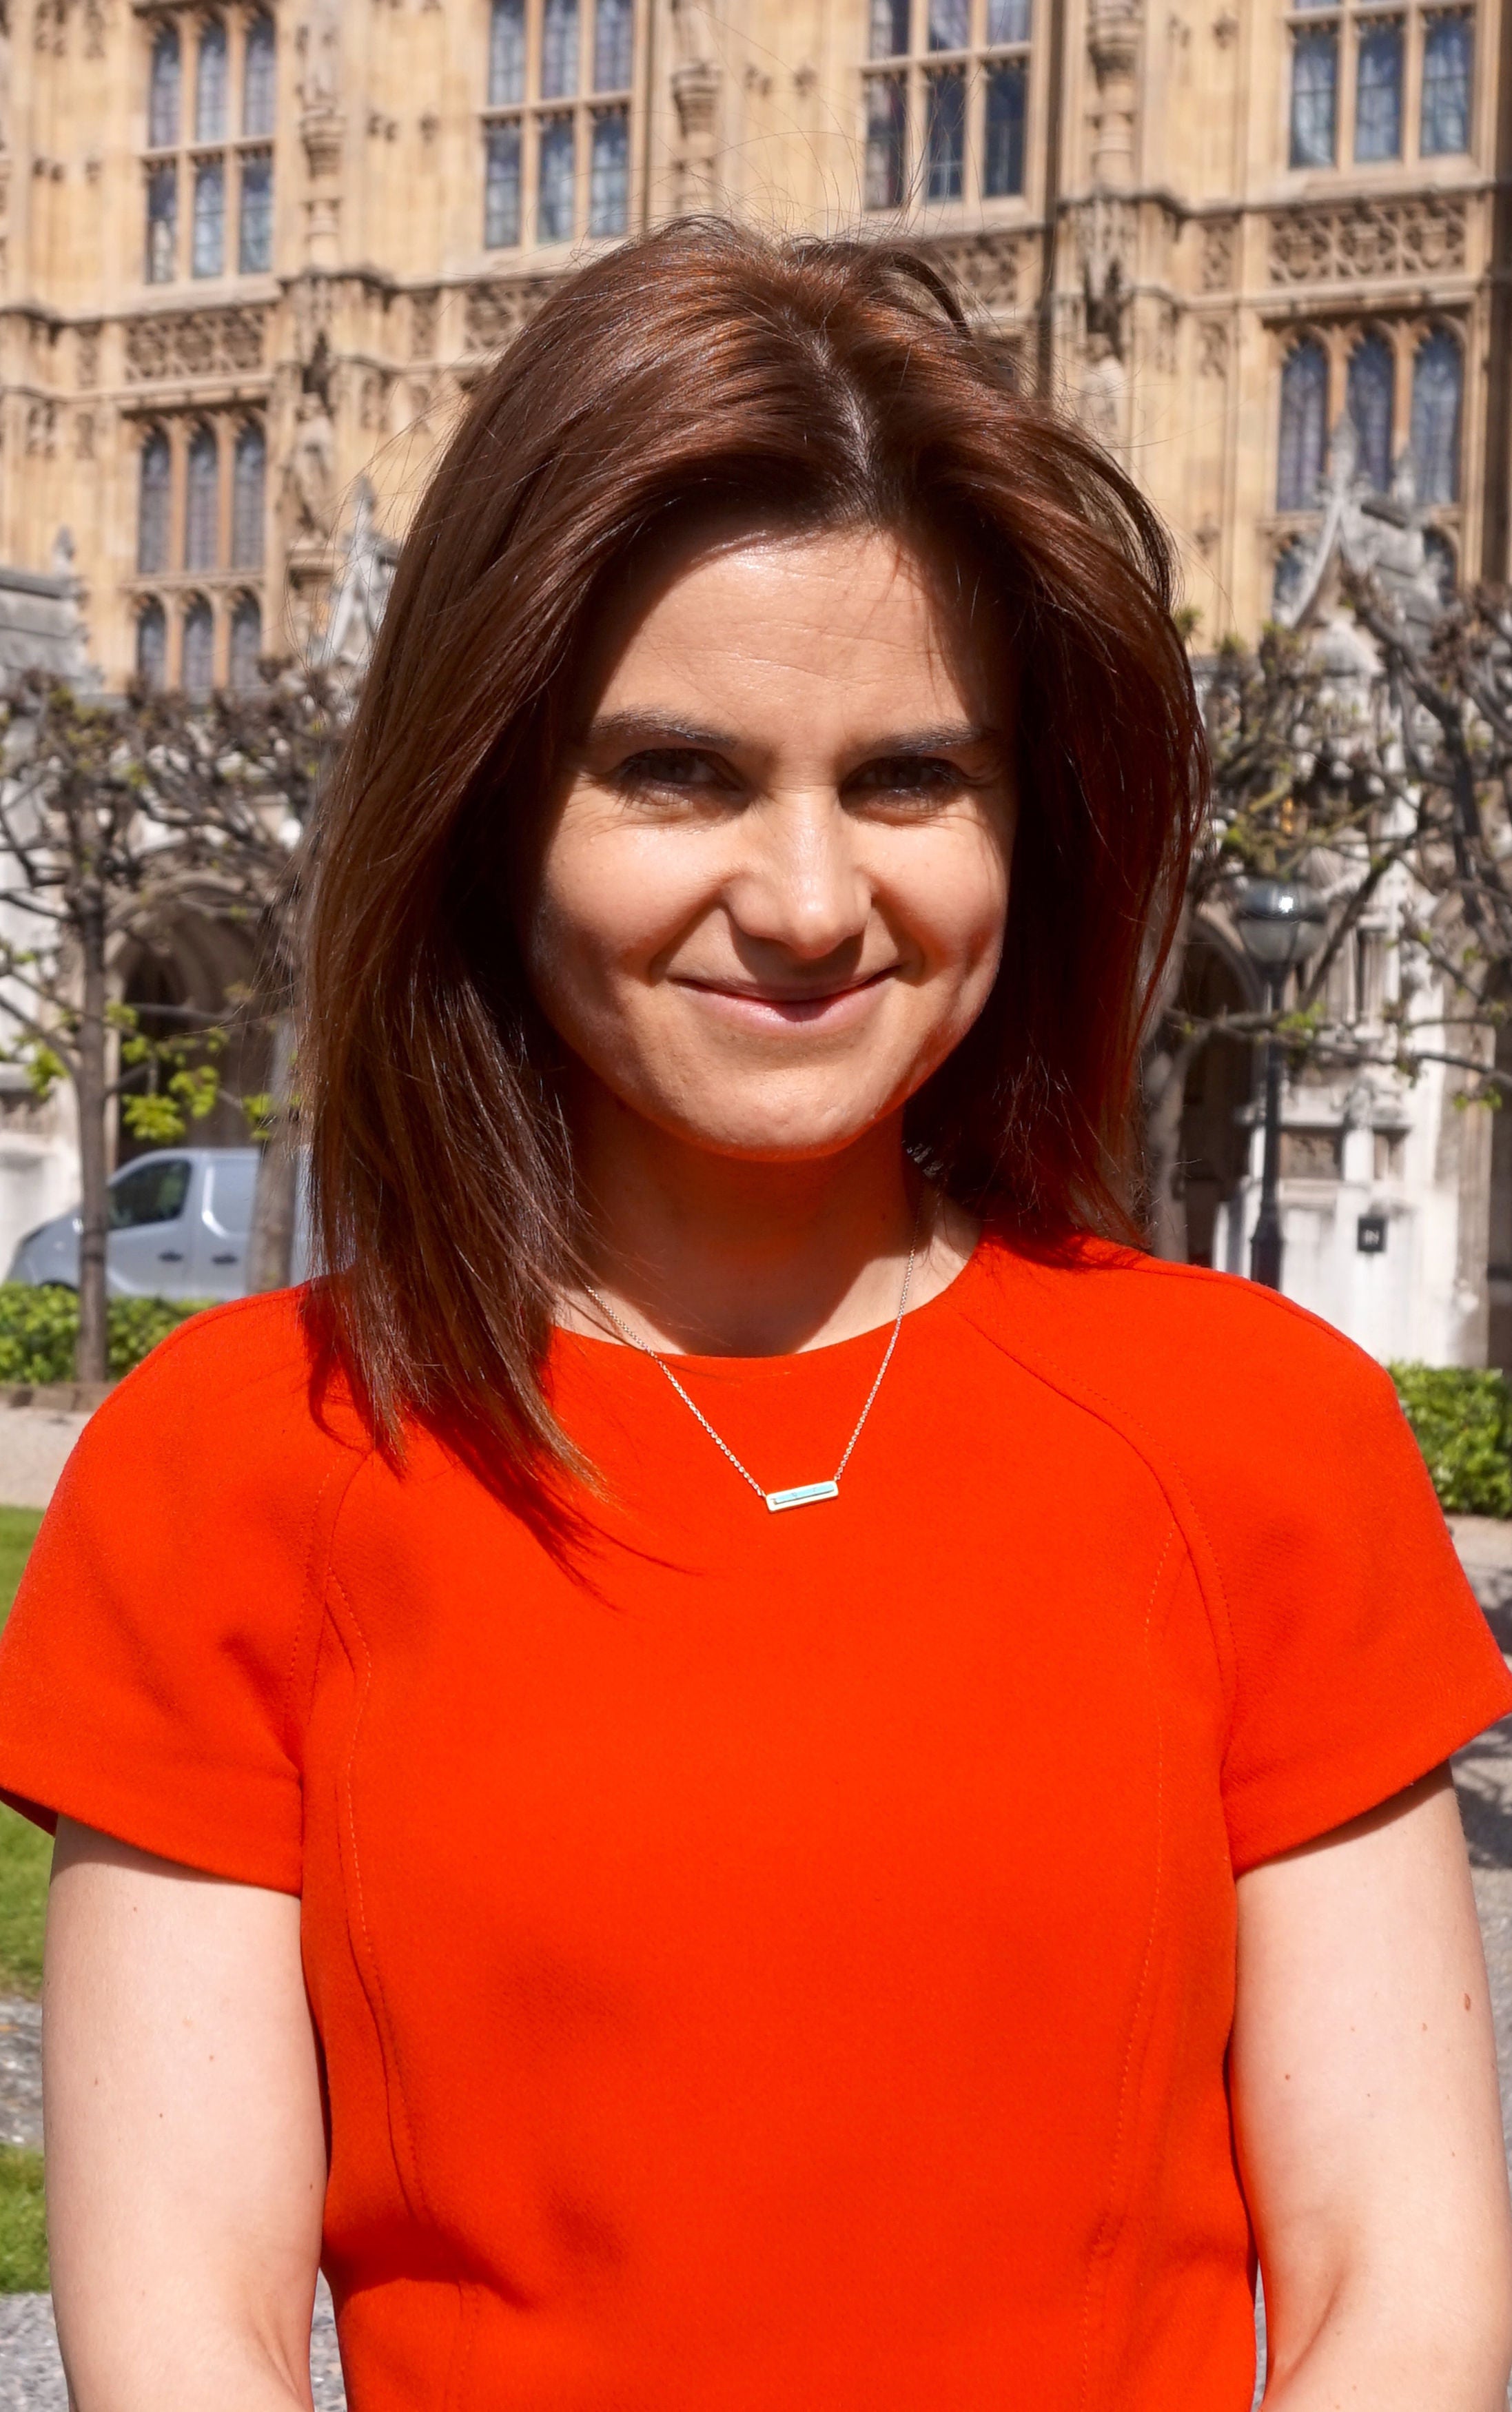 Batley and Spen Labour MP Jo Cox was killed by far-right extremist Thomas Mair in June 2016 (Jo Cox Foundation/PA)